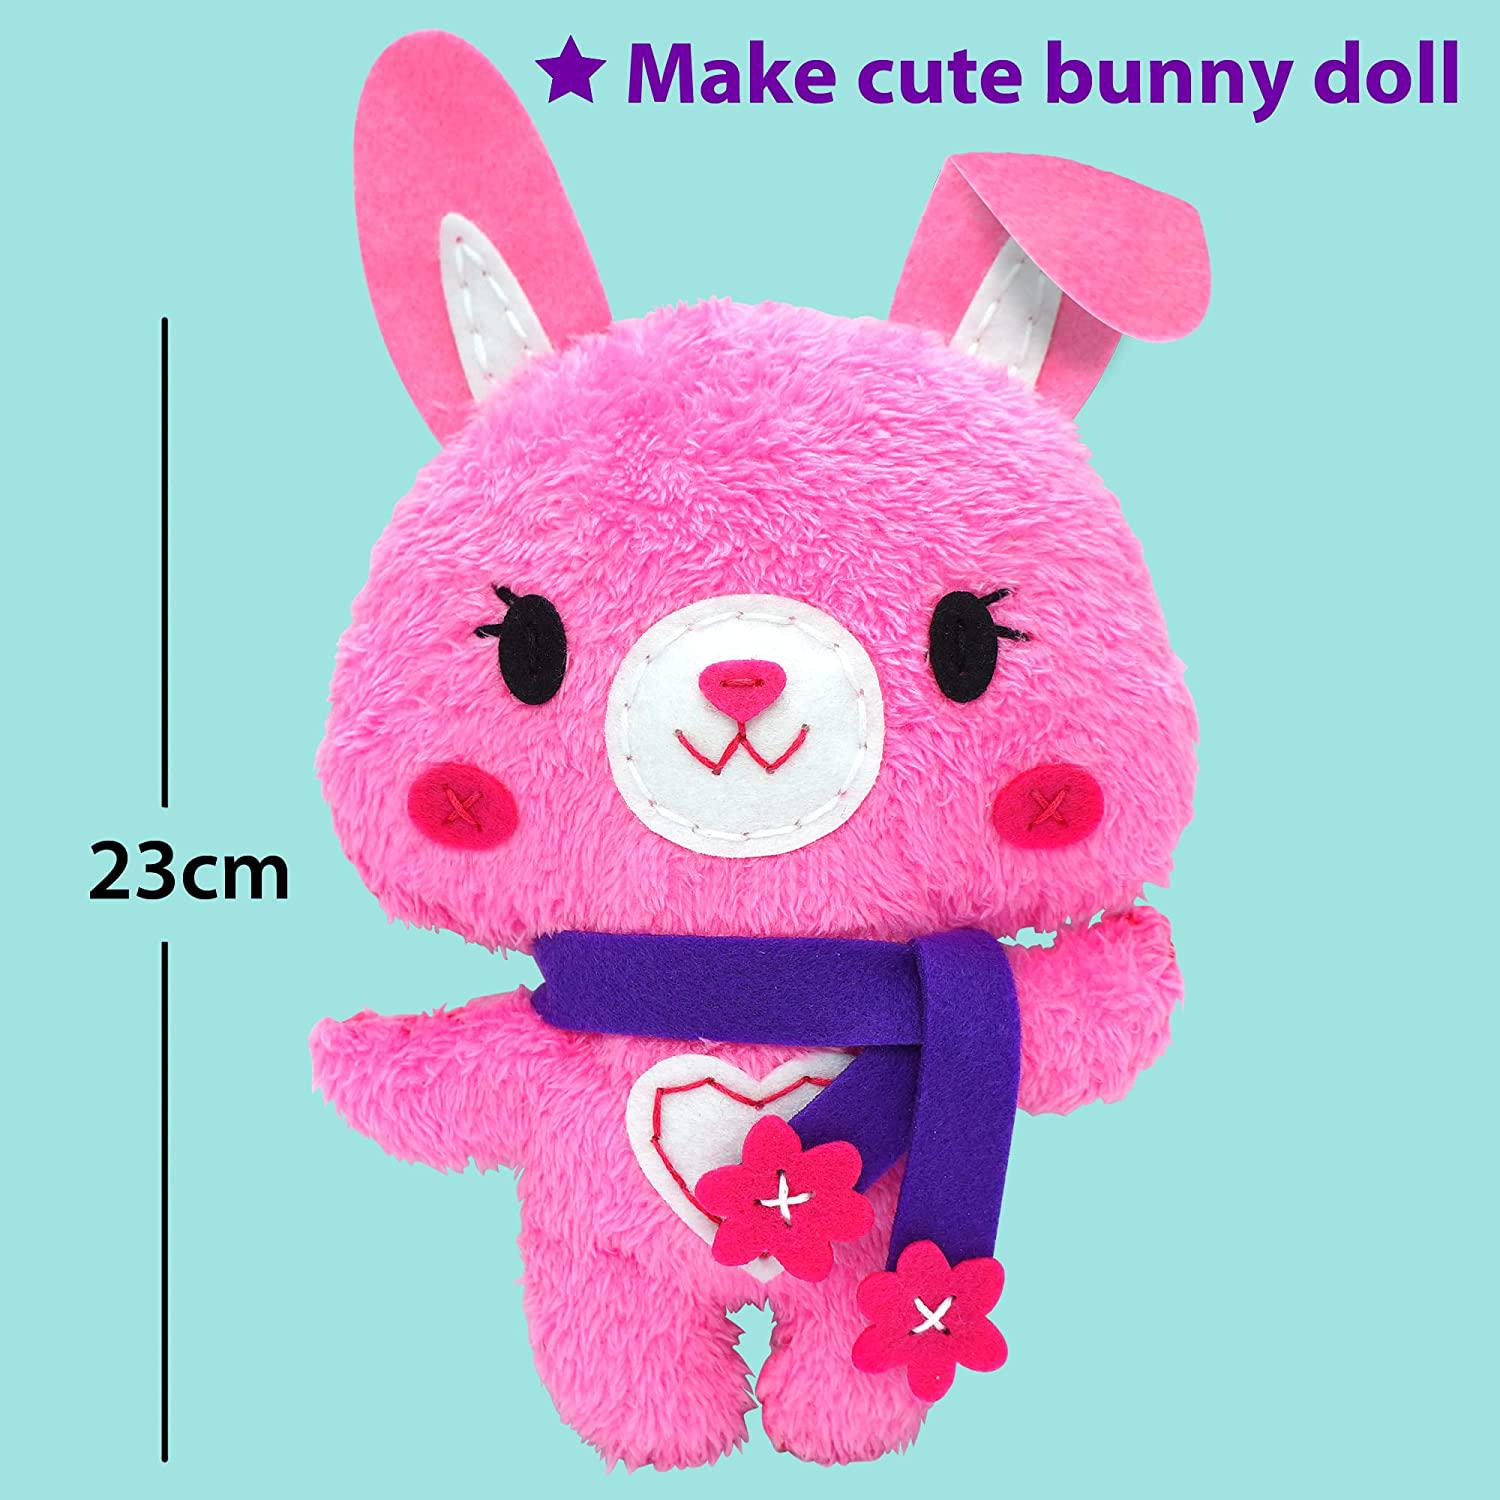 KRAFUN, KraFun Sewing Kit for Kids Beginner My First Art and Craft, Includes Bunny Doll Stuffed Animal, Instructions and Plush Felt Materials for Learn to Sew, Embroidery, Age 7 8 9 10 11 12